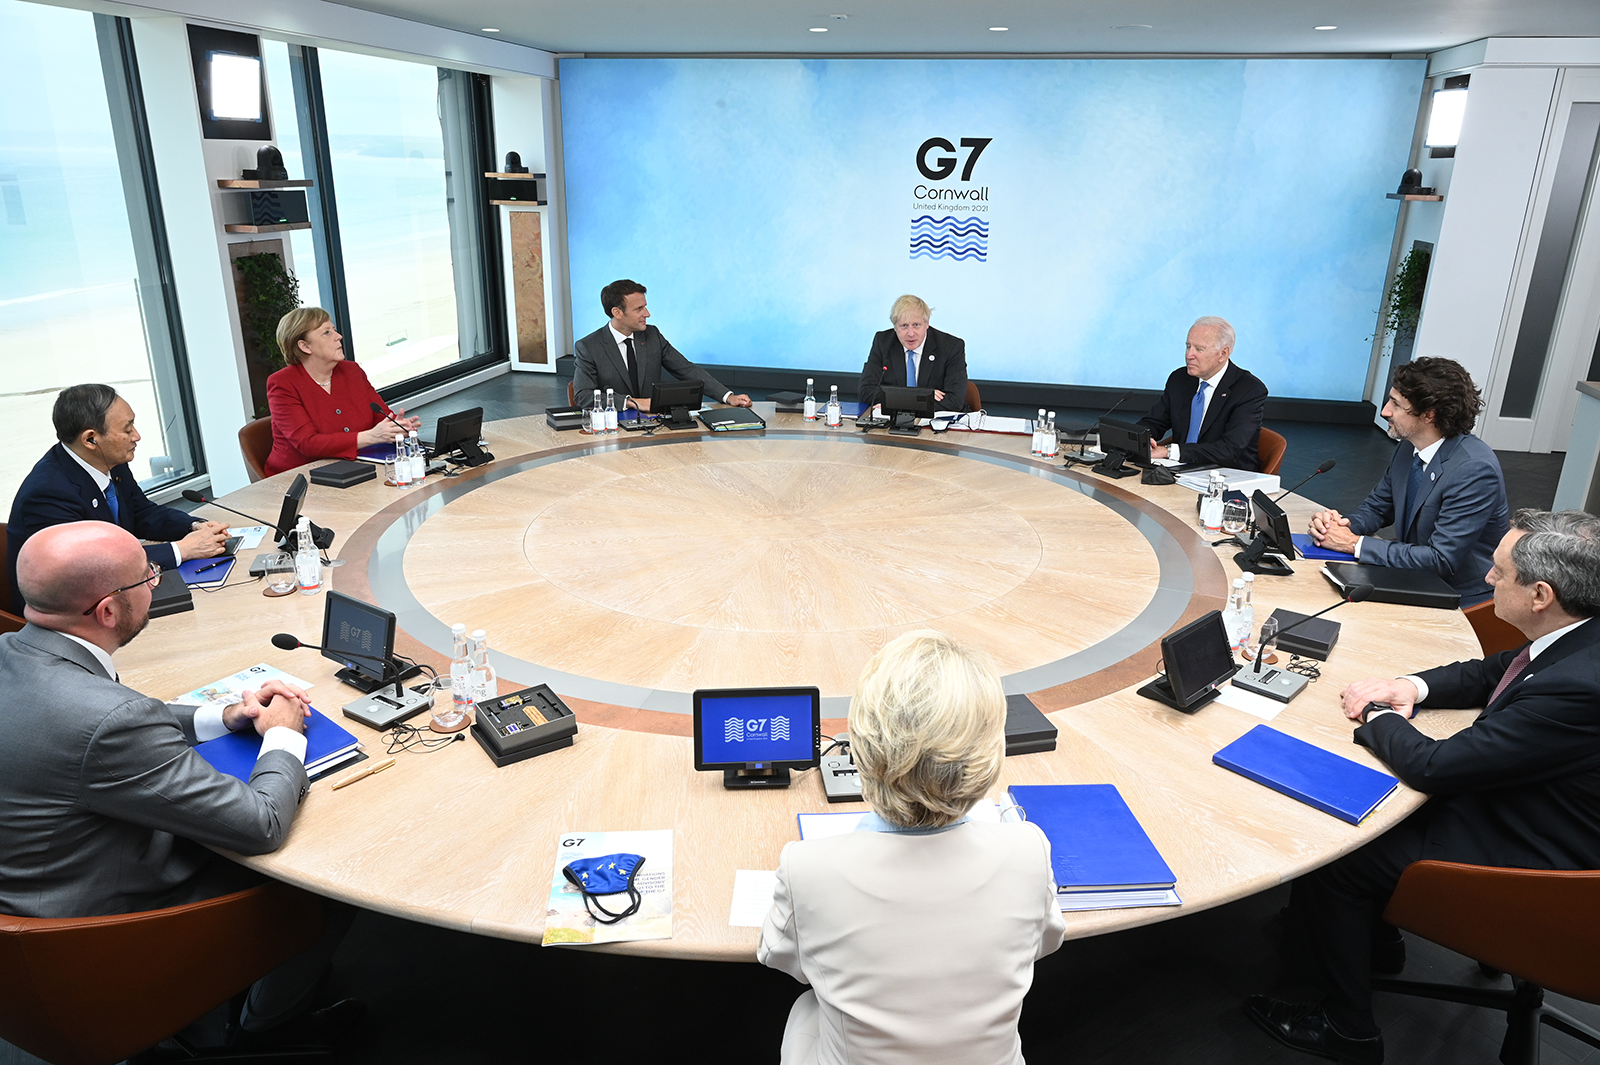 US President Joe Biden, sitting between UK Prime Minister Boris Johnson and Canada Prime Minister Justin Trudeau, participates in a meeting at the G7 in Carbis Bay near Cornwall, England, on June 11. 